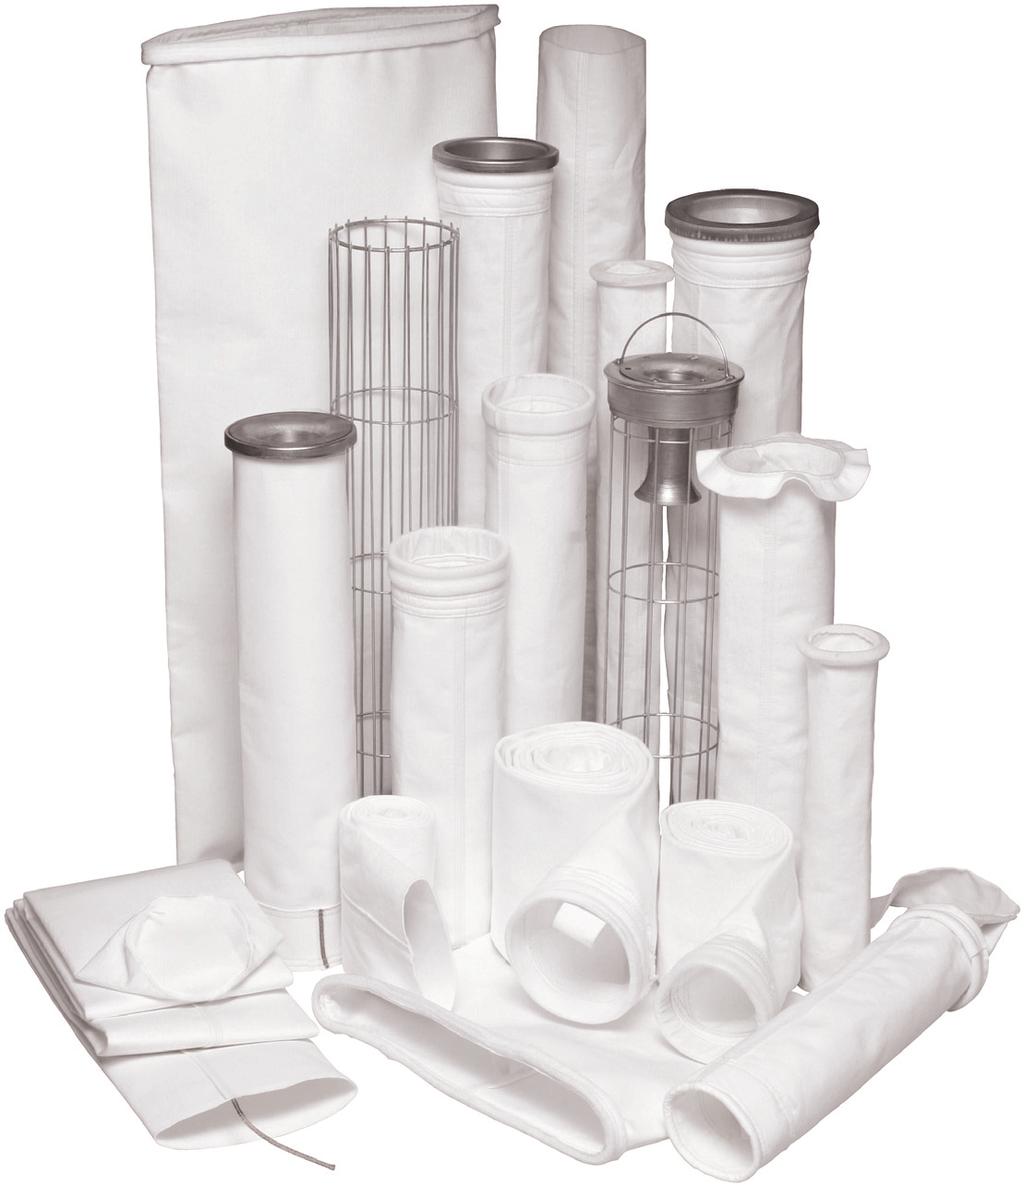 UNPARALLELED SERVICE & SUPPORT HERE TO SERVE YOU Providing technically advanced bag filters with the longest filtration life is just one of Donaldson Torit s distinctions.